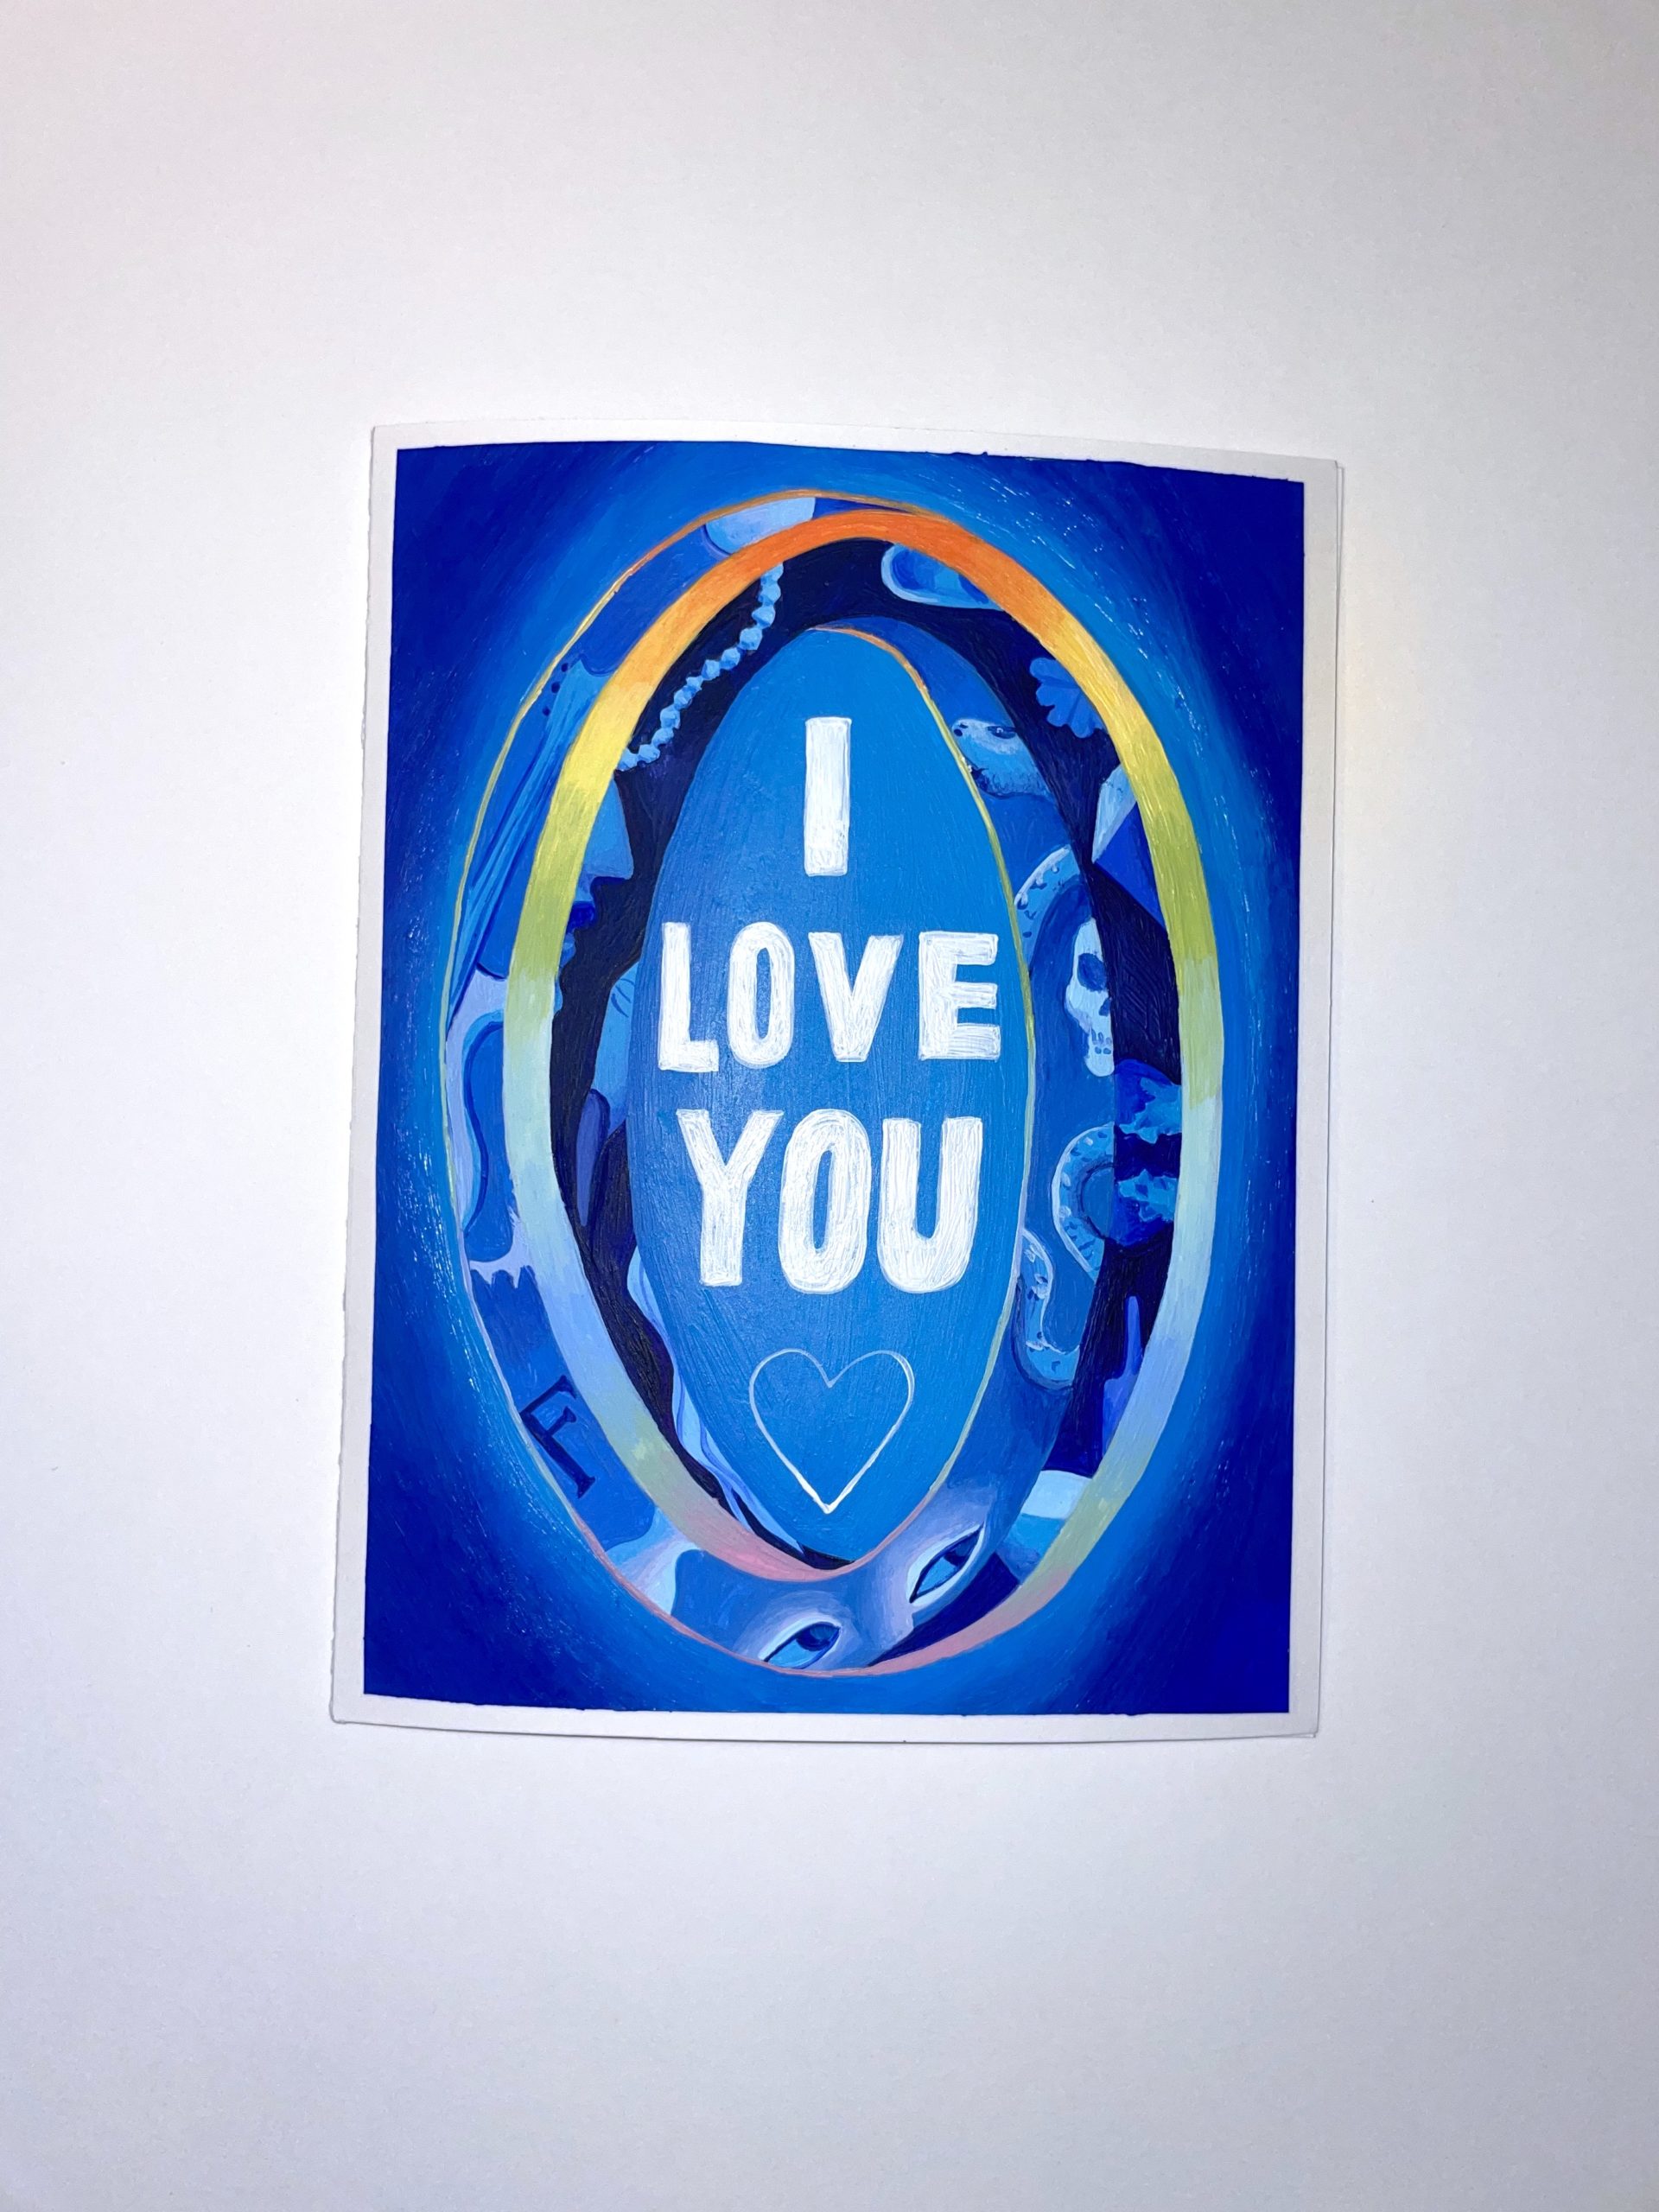 I Love You: Hand-Painted Card